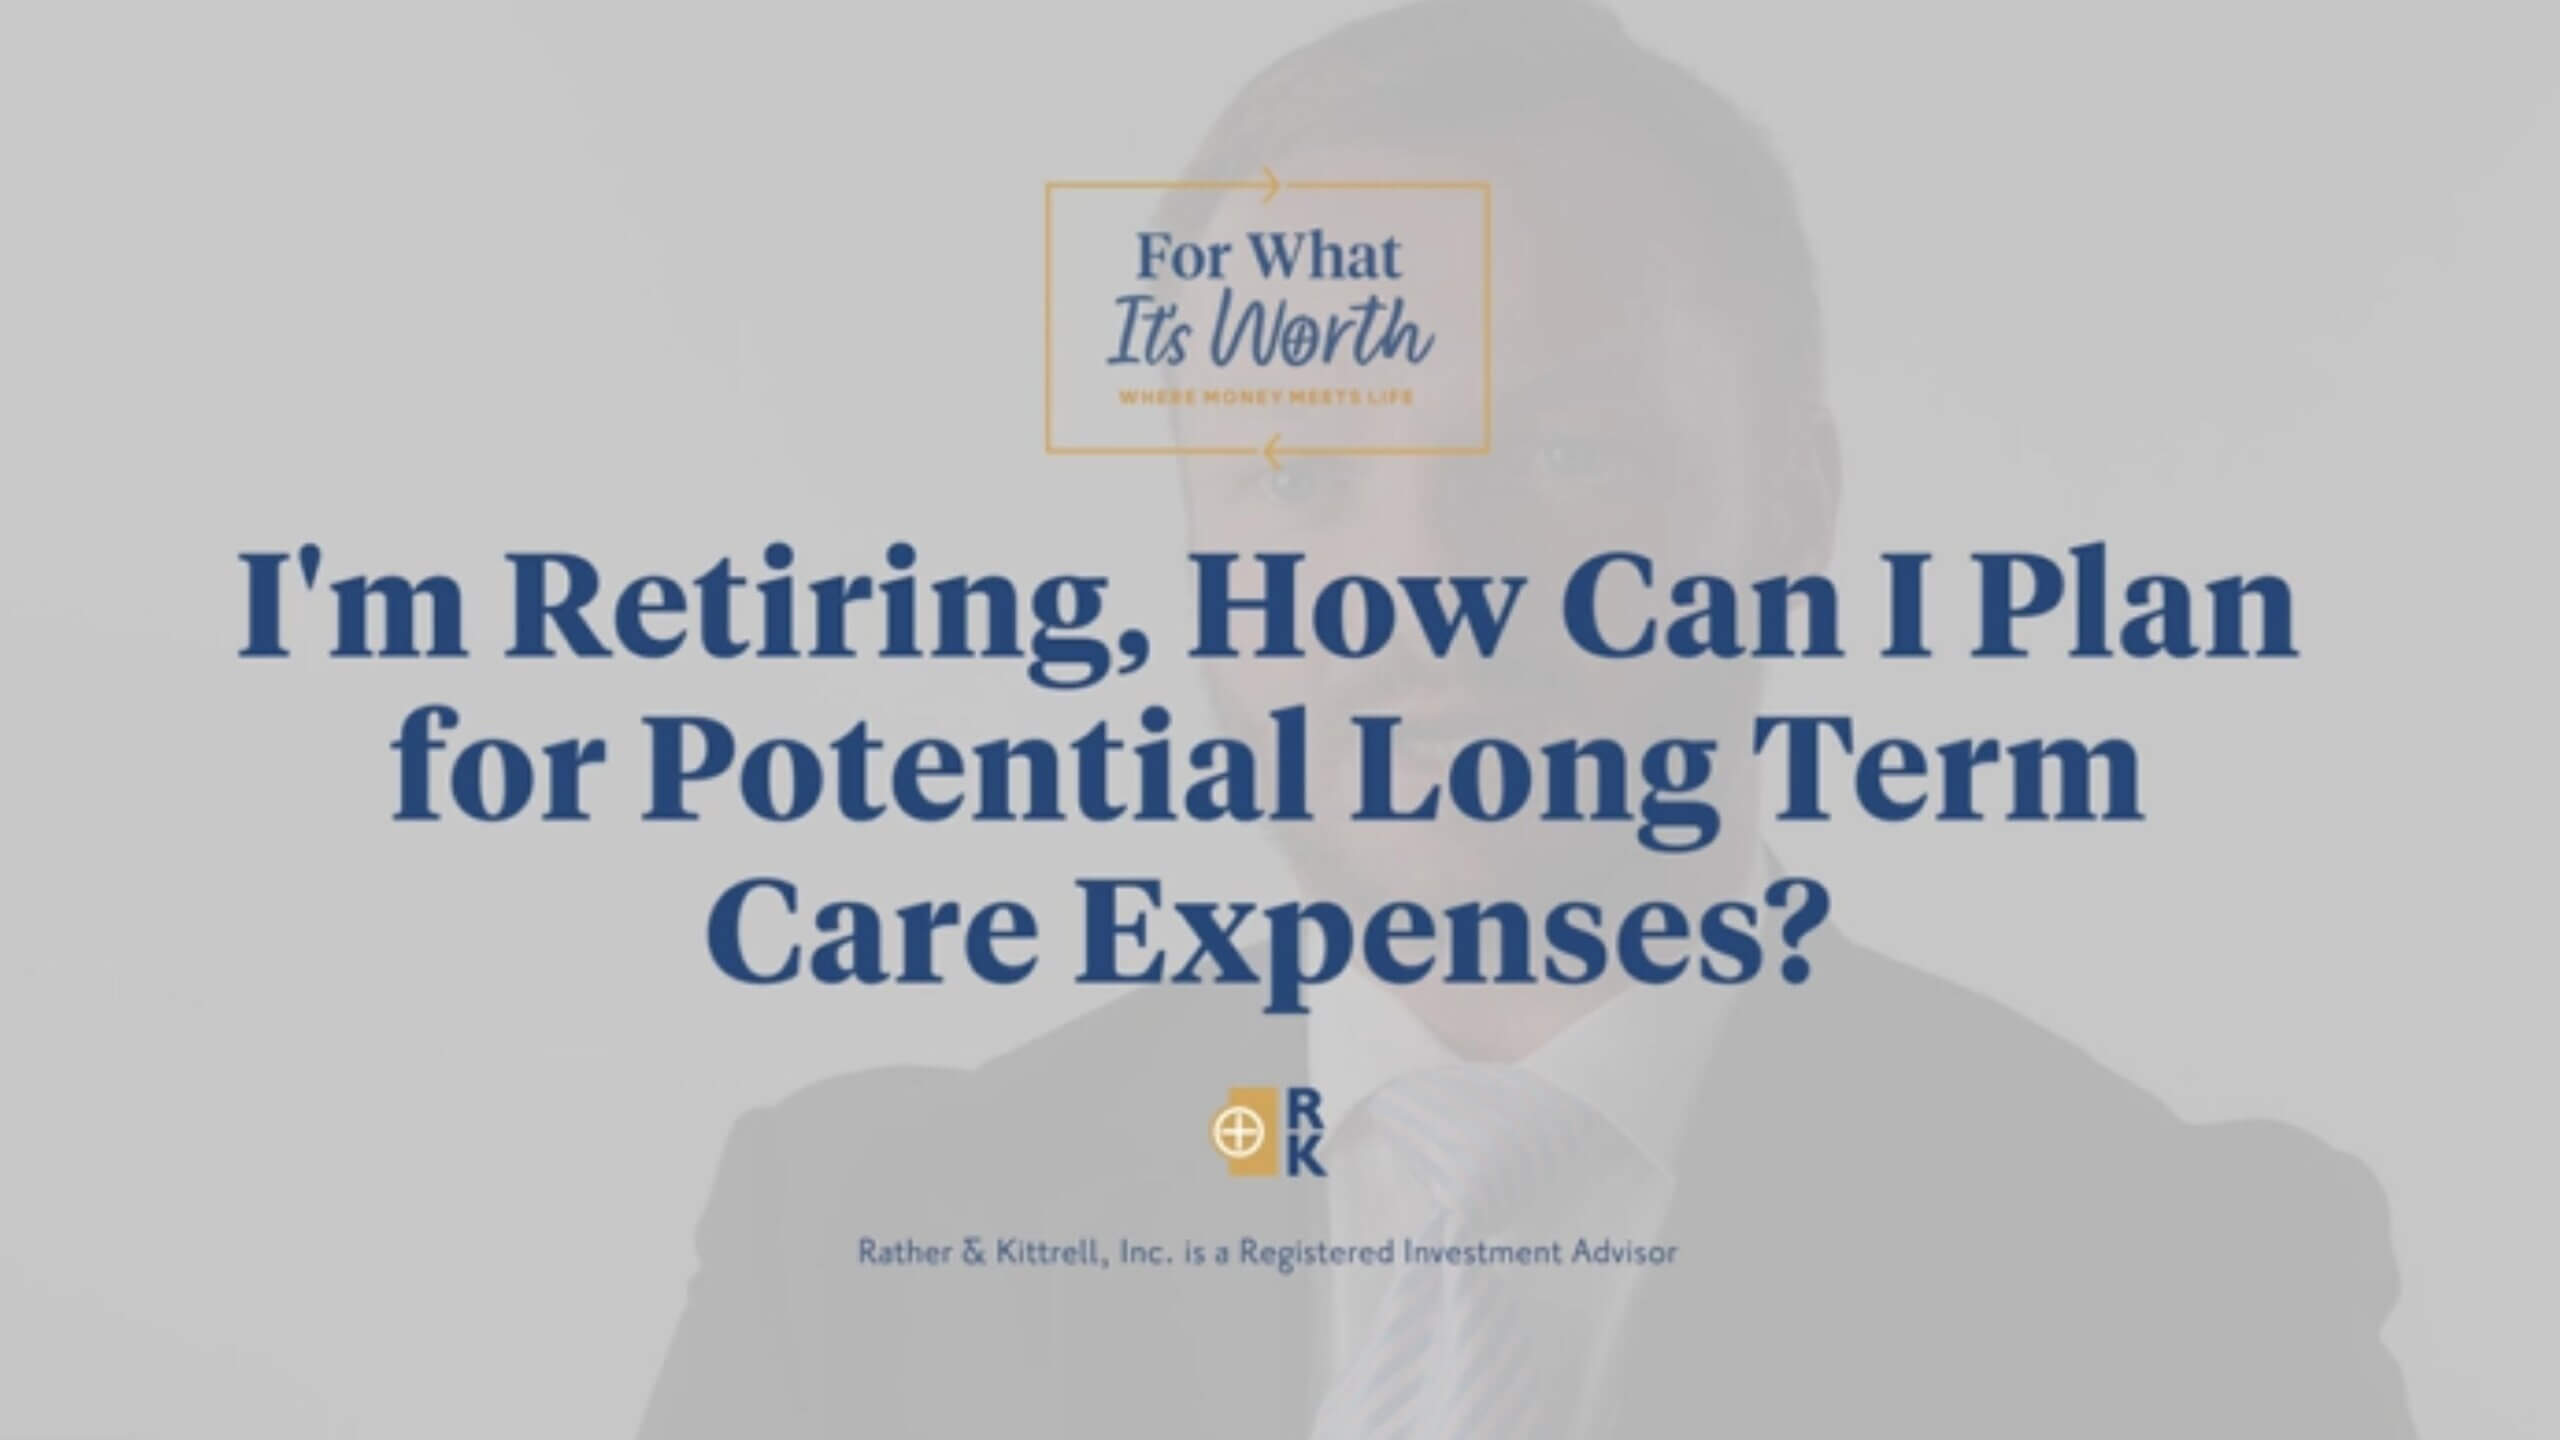 I'm retiring, how can I plan for potential long term care expenses?